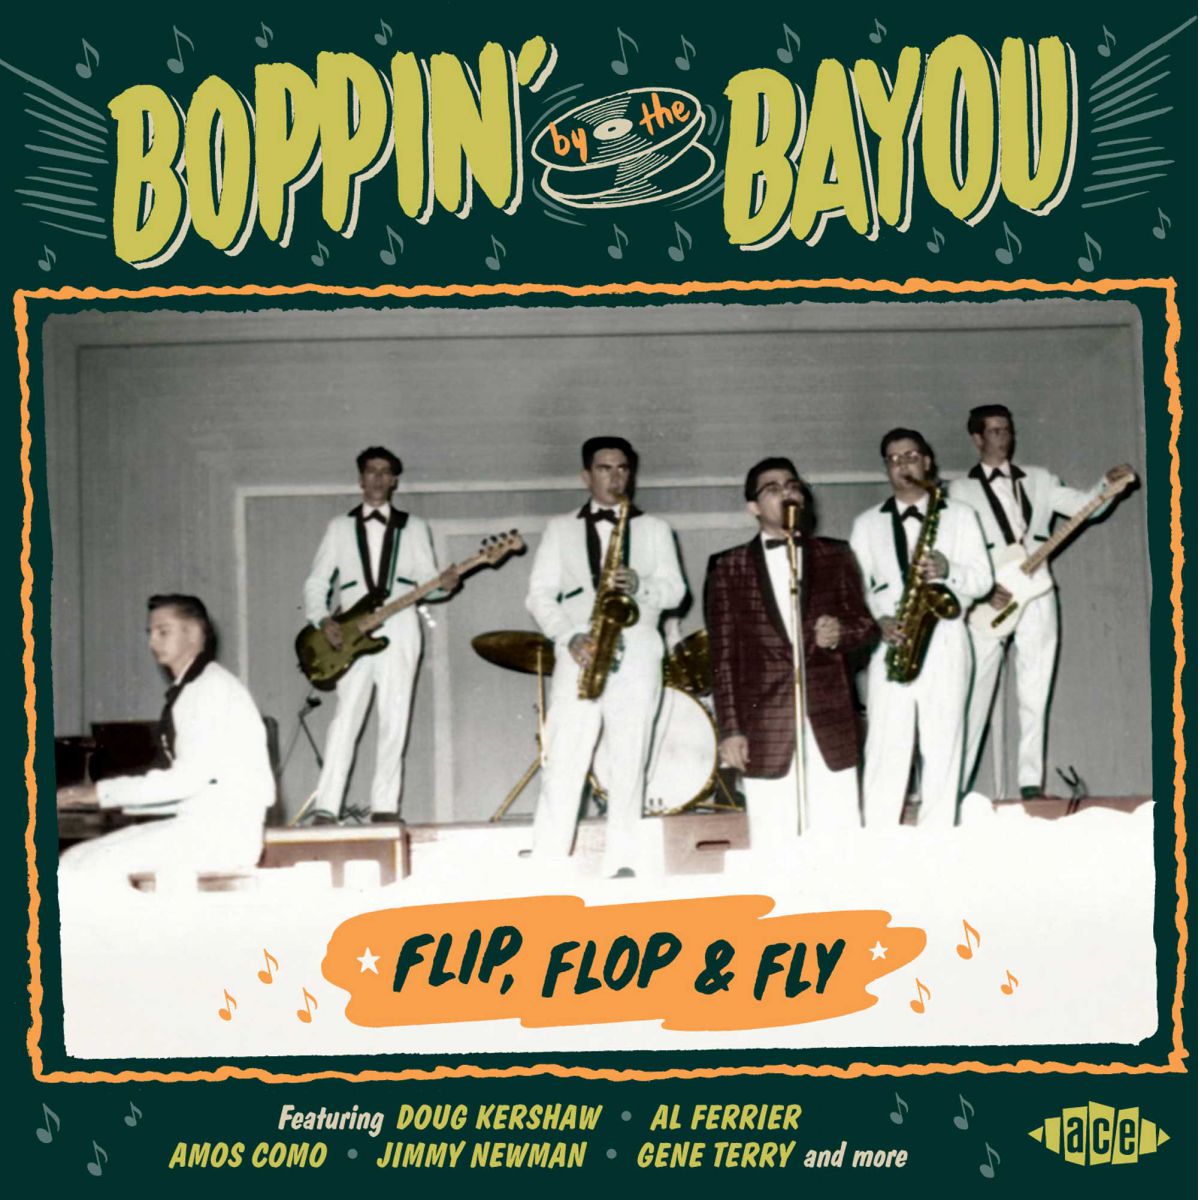 V.A. (BOPPIN' BY THE BAYOU) / BOPPIN' BY THE BAYOU: FLIP, FLOP & FLY